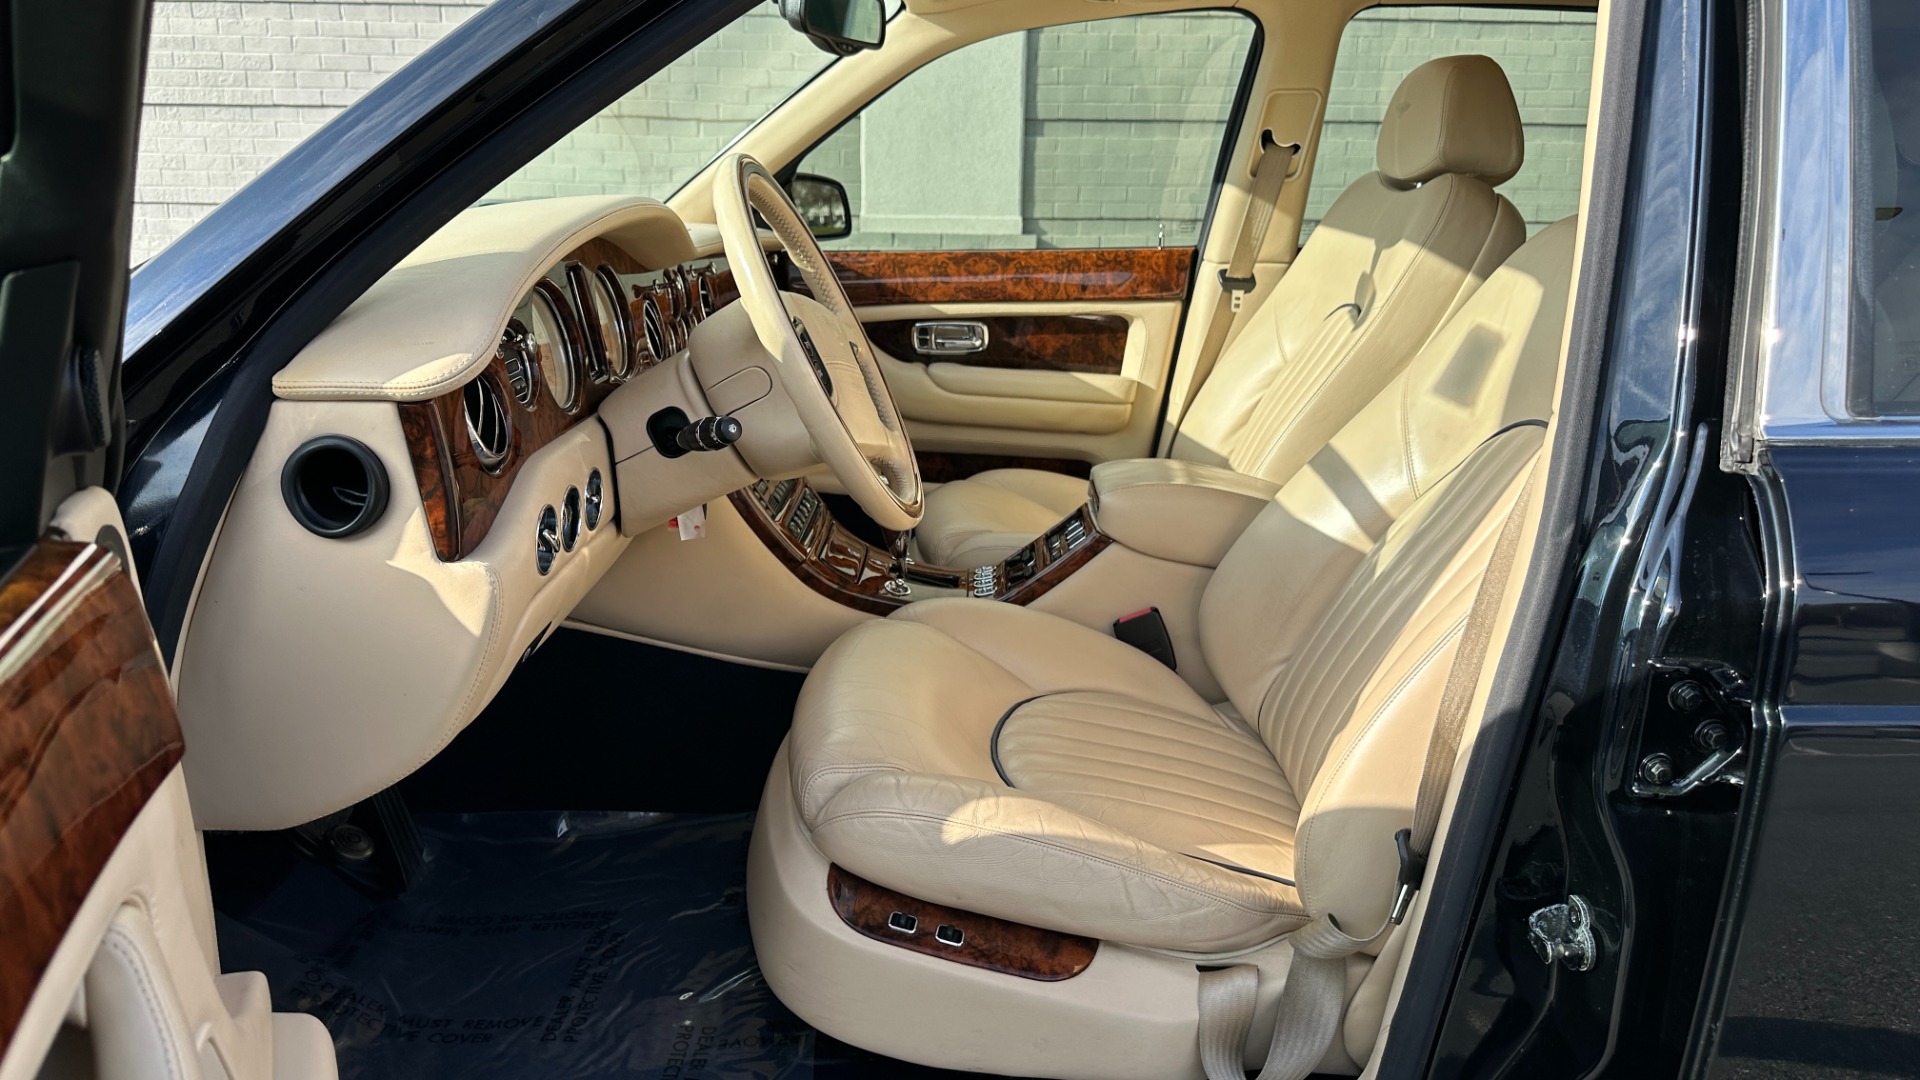 Used 2001 Bentley ARNAGE RED LABEL 6.75L V8 / TURBO / FULL LEATHER / WOOD TRIM / HEATED SEATS / SUNR for sale $26,999 at Formula Imports in Charlotte NC 28227 10